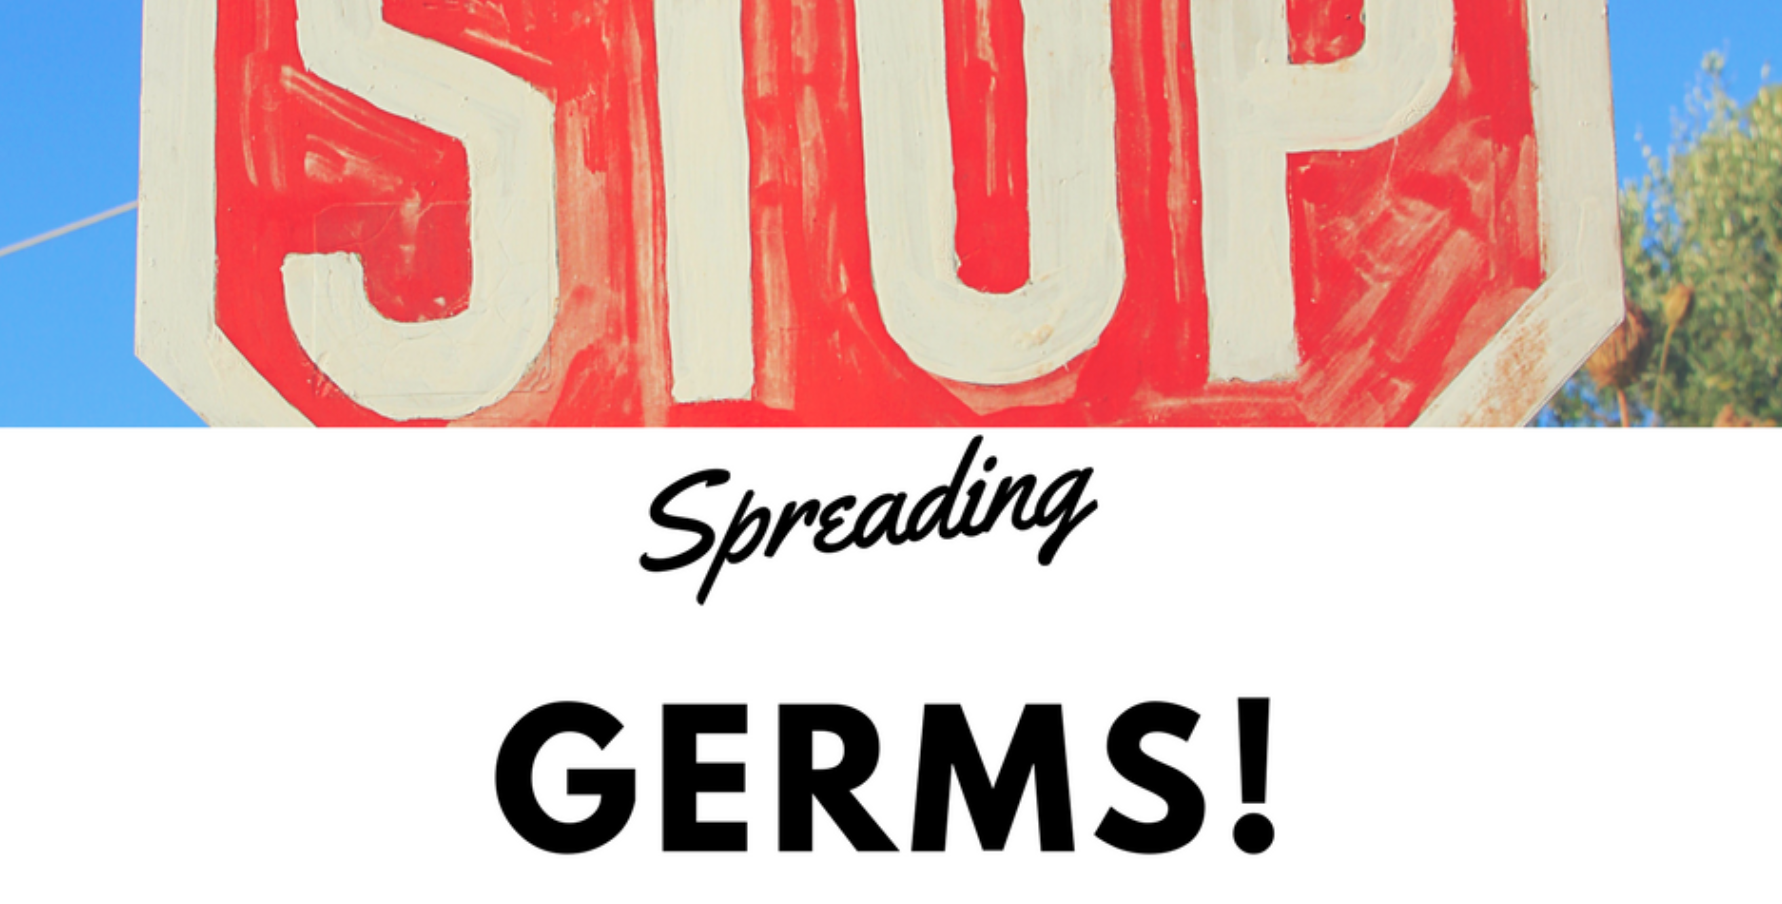 Stop Spreading Germs